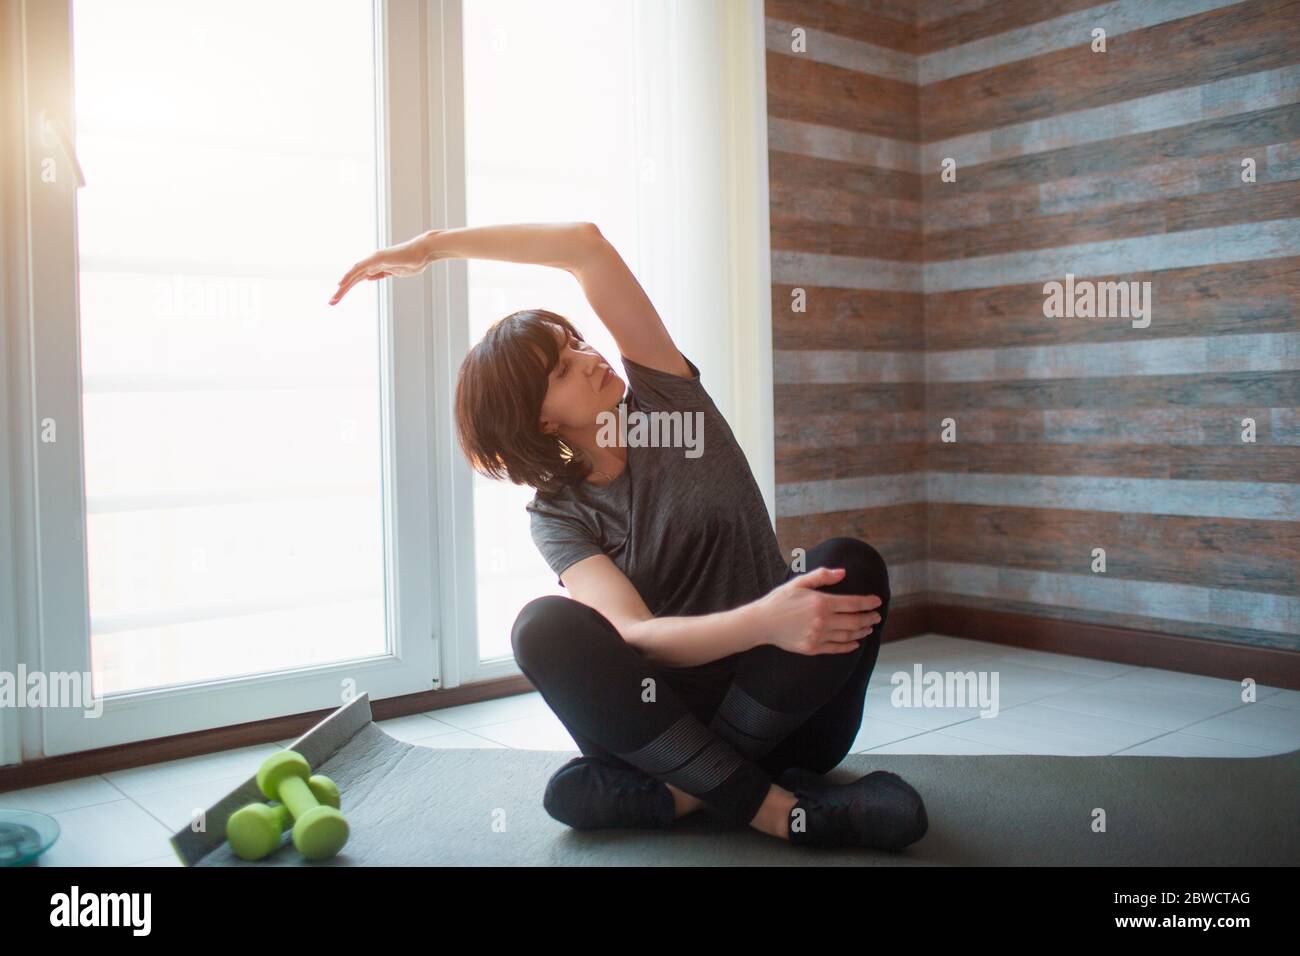 Adult fit slim woman has workout at home. Senior model sit with legs crossed and stretches arm to side. Exercising alone to get in good shape and Stock Photo